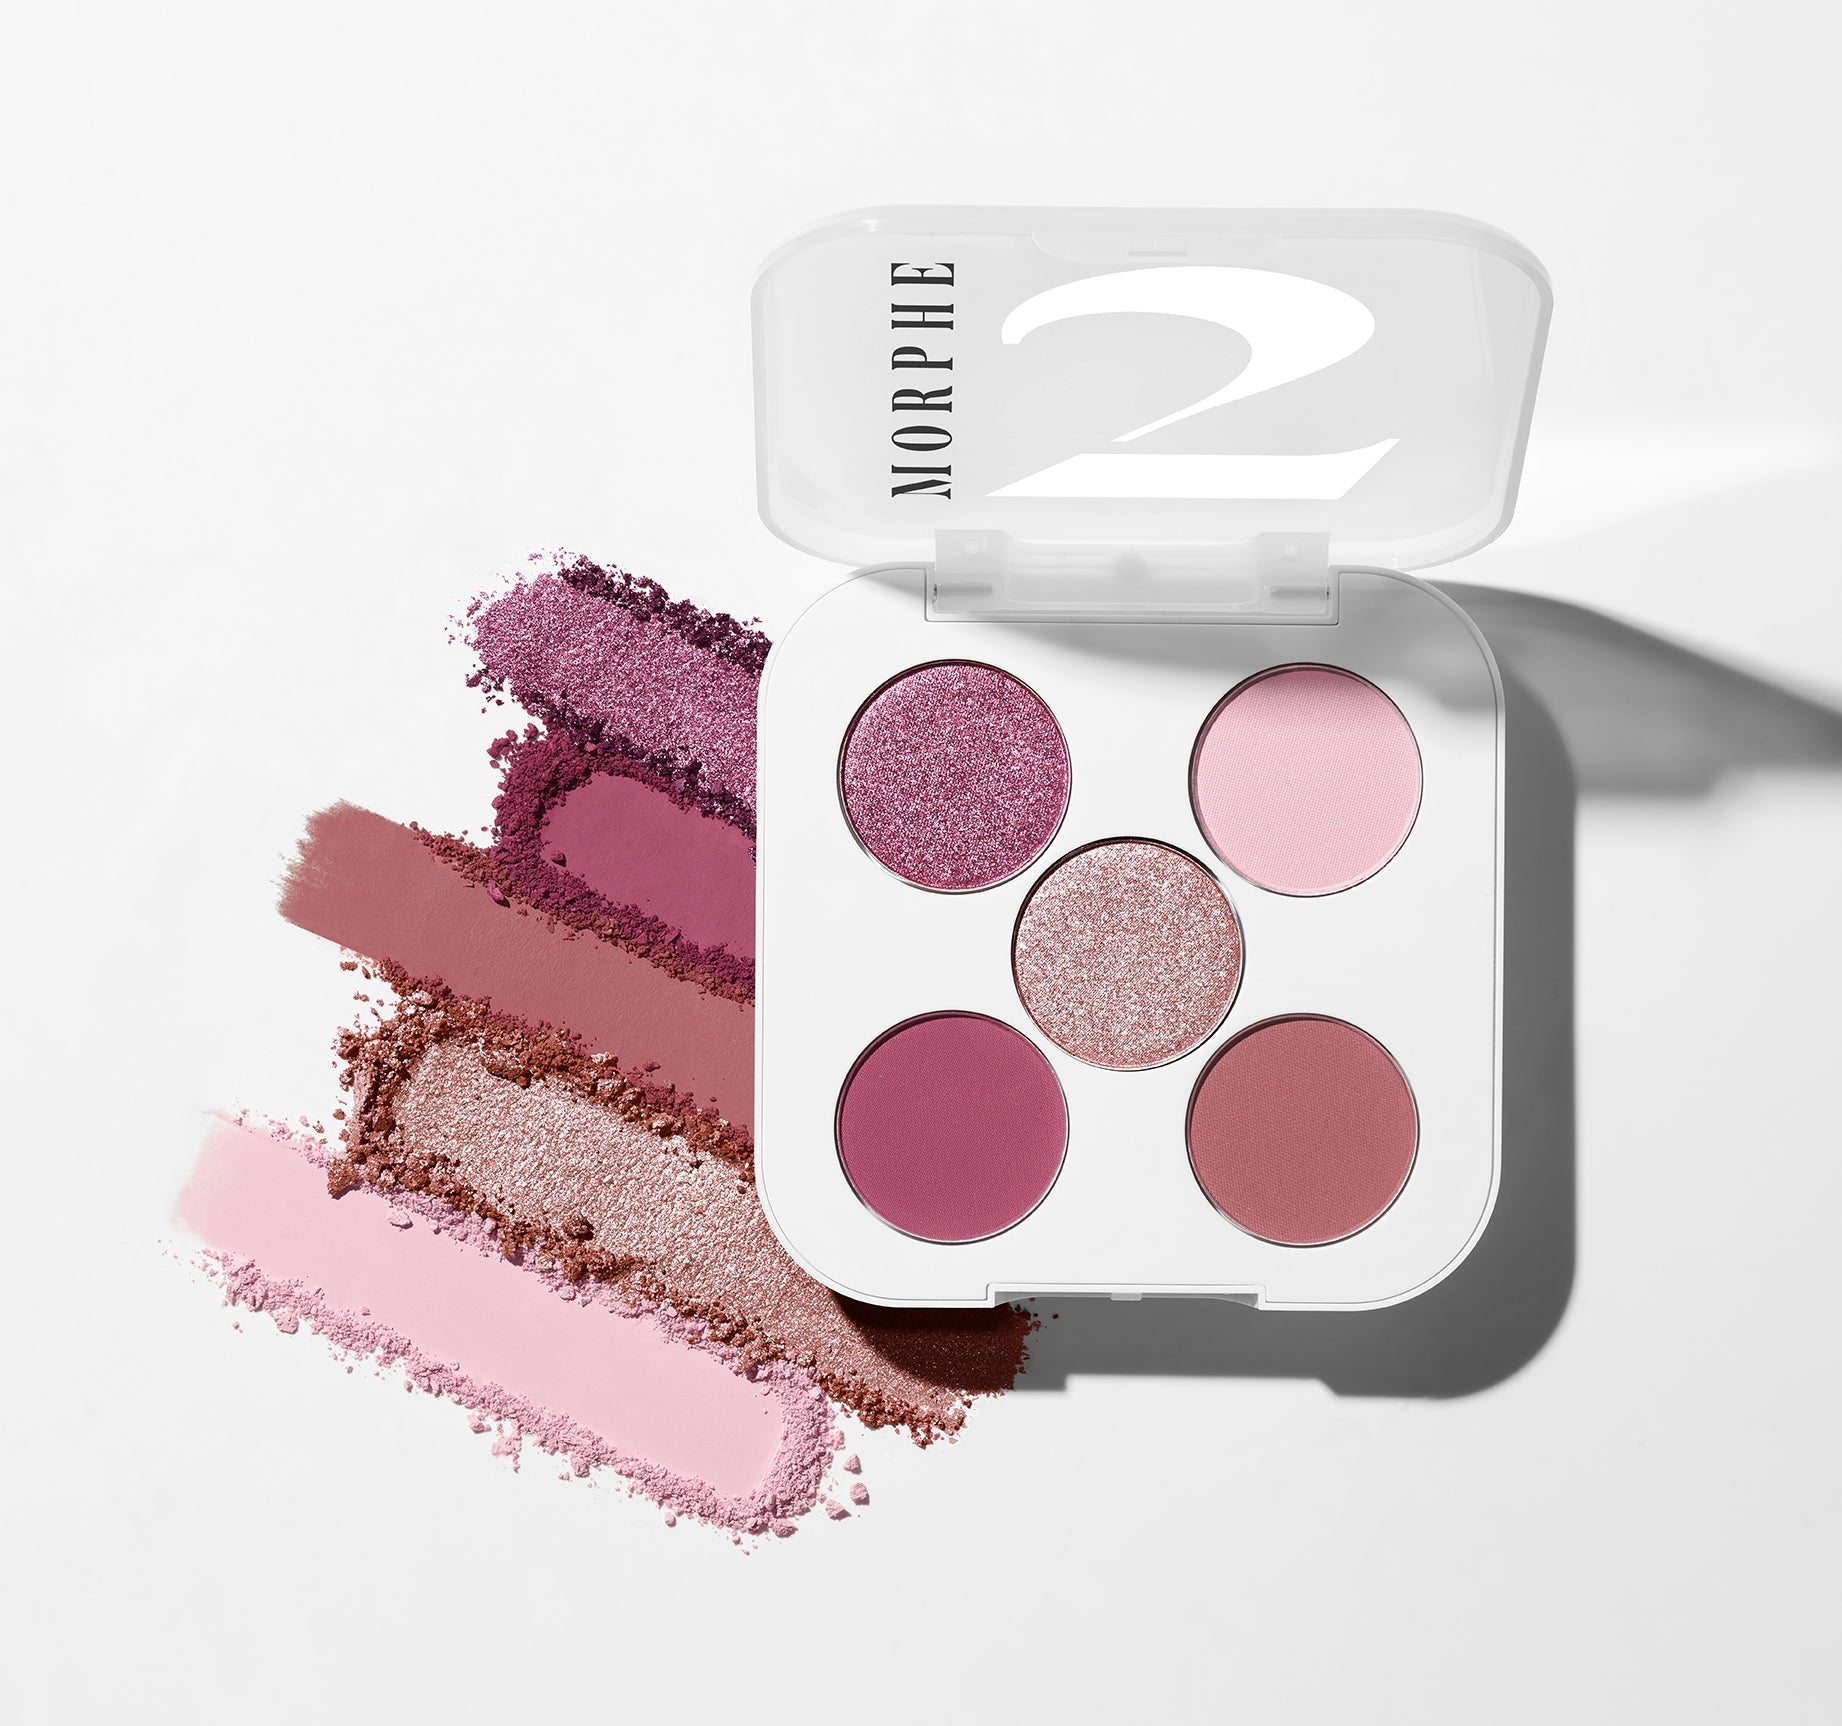 Ready In 5 Eyeshadow Palette-From Hawaii With Love - Image 4